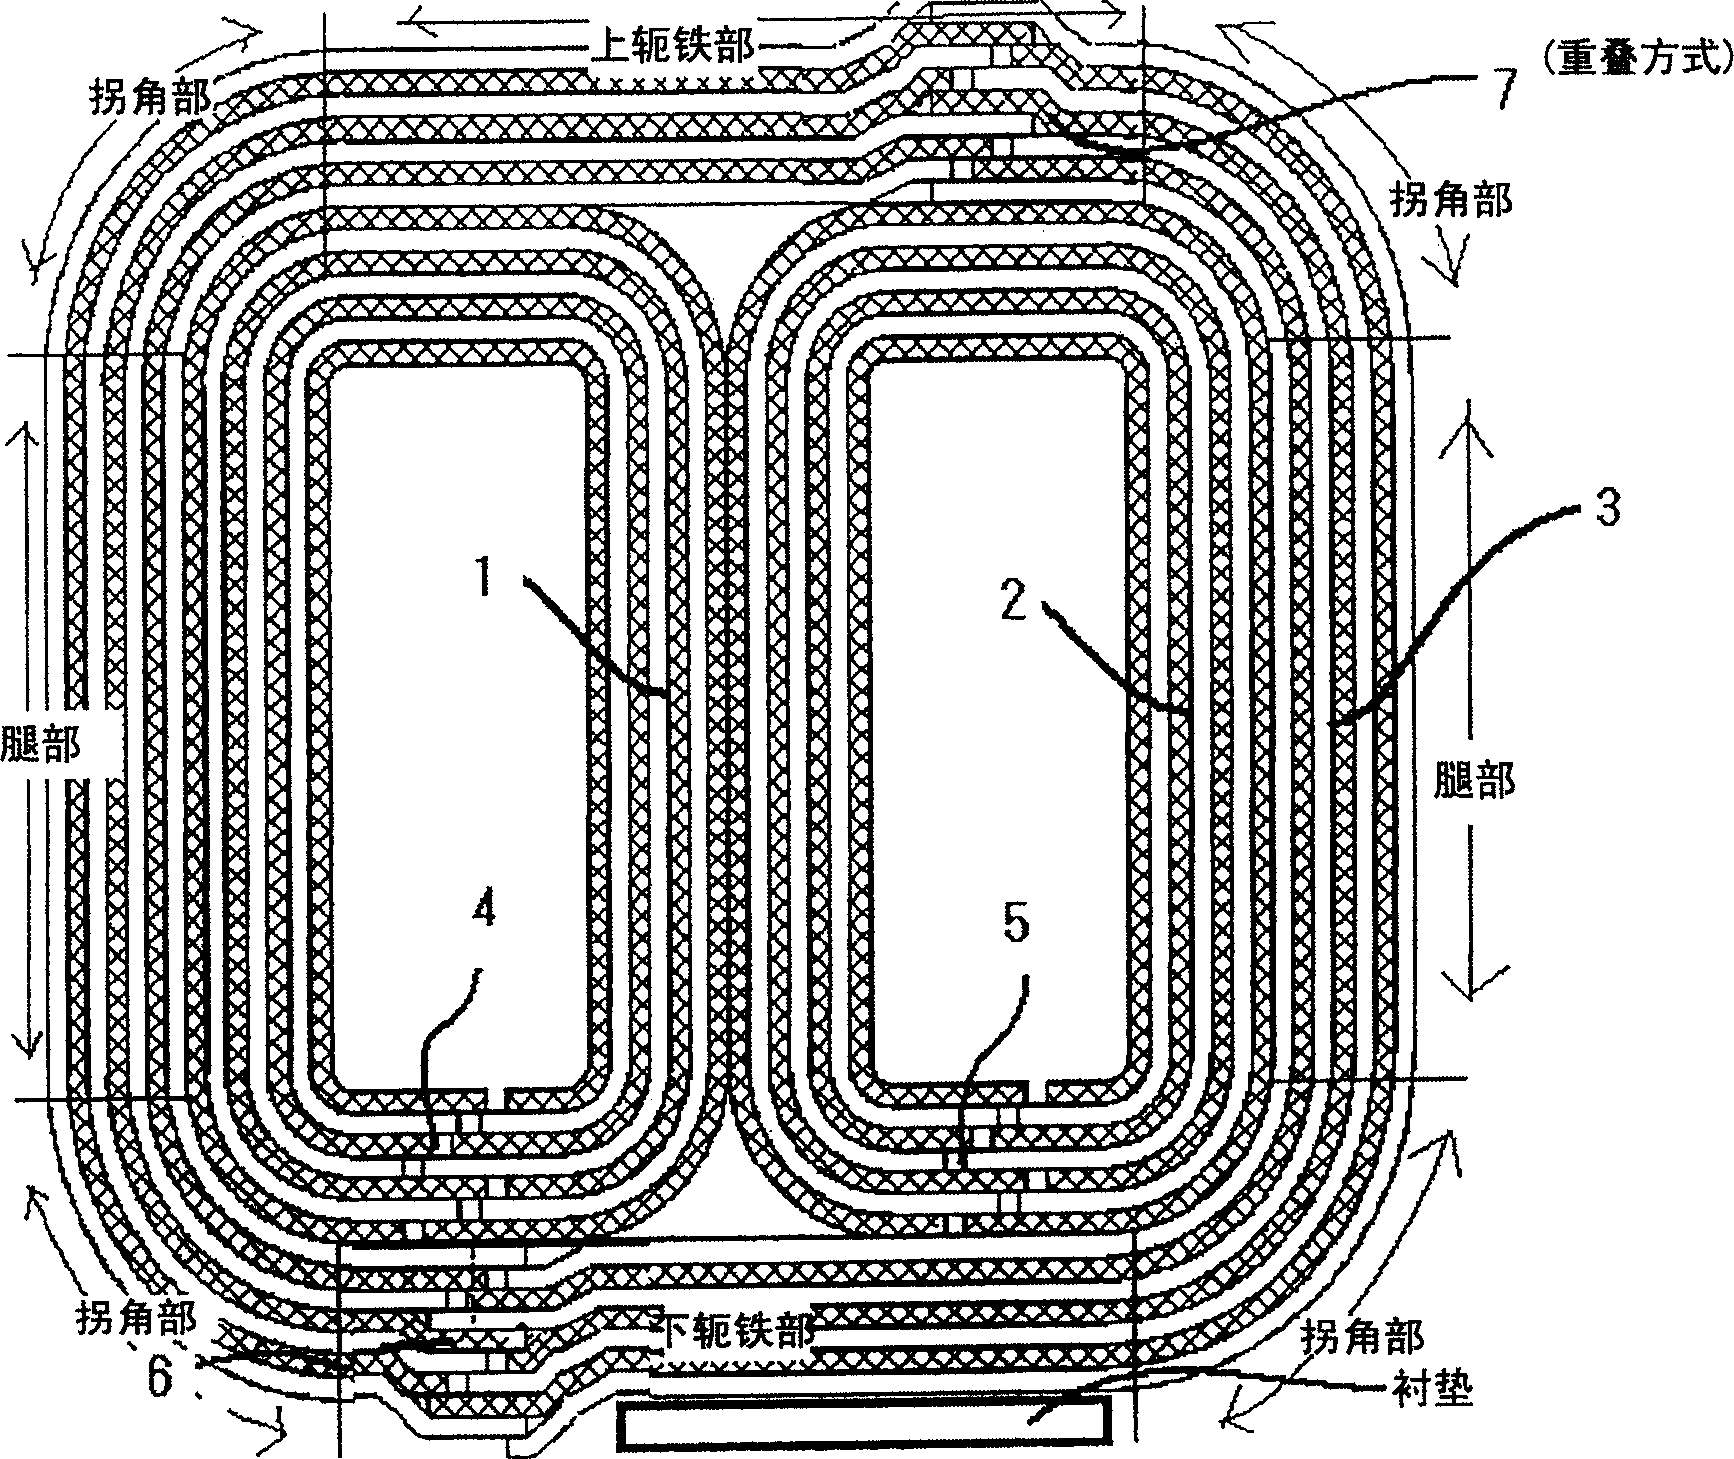 Three-phase wound core and three phase transformer